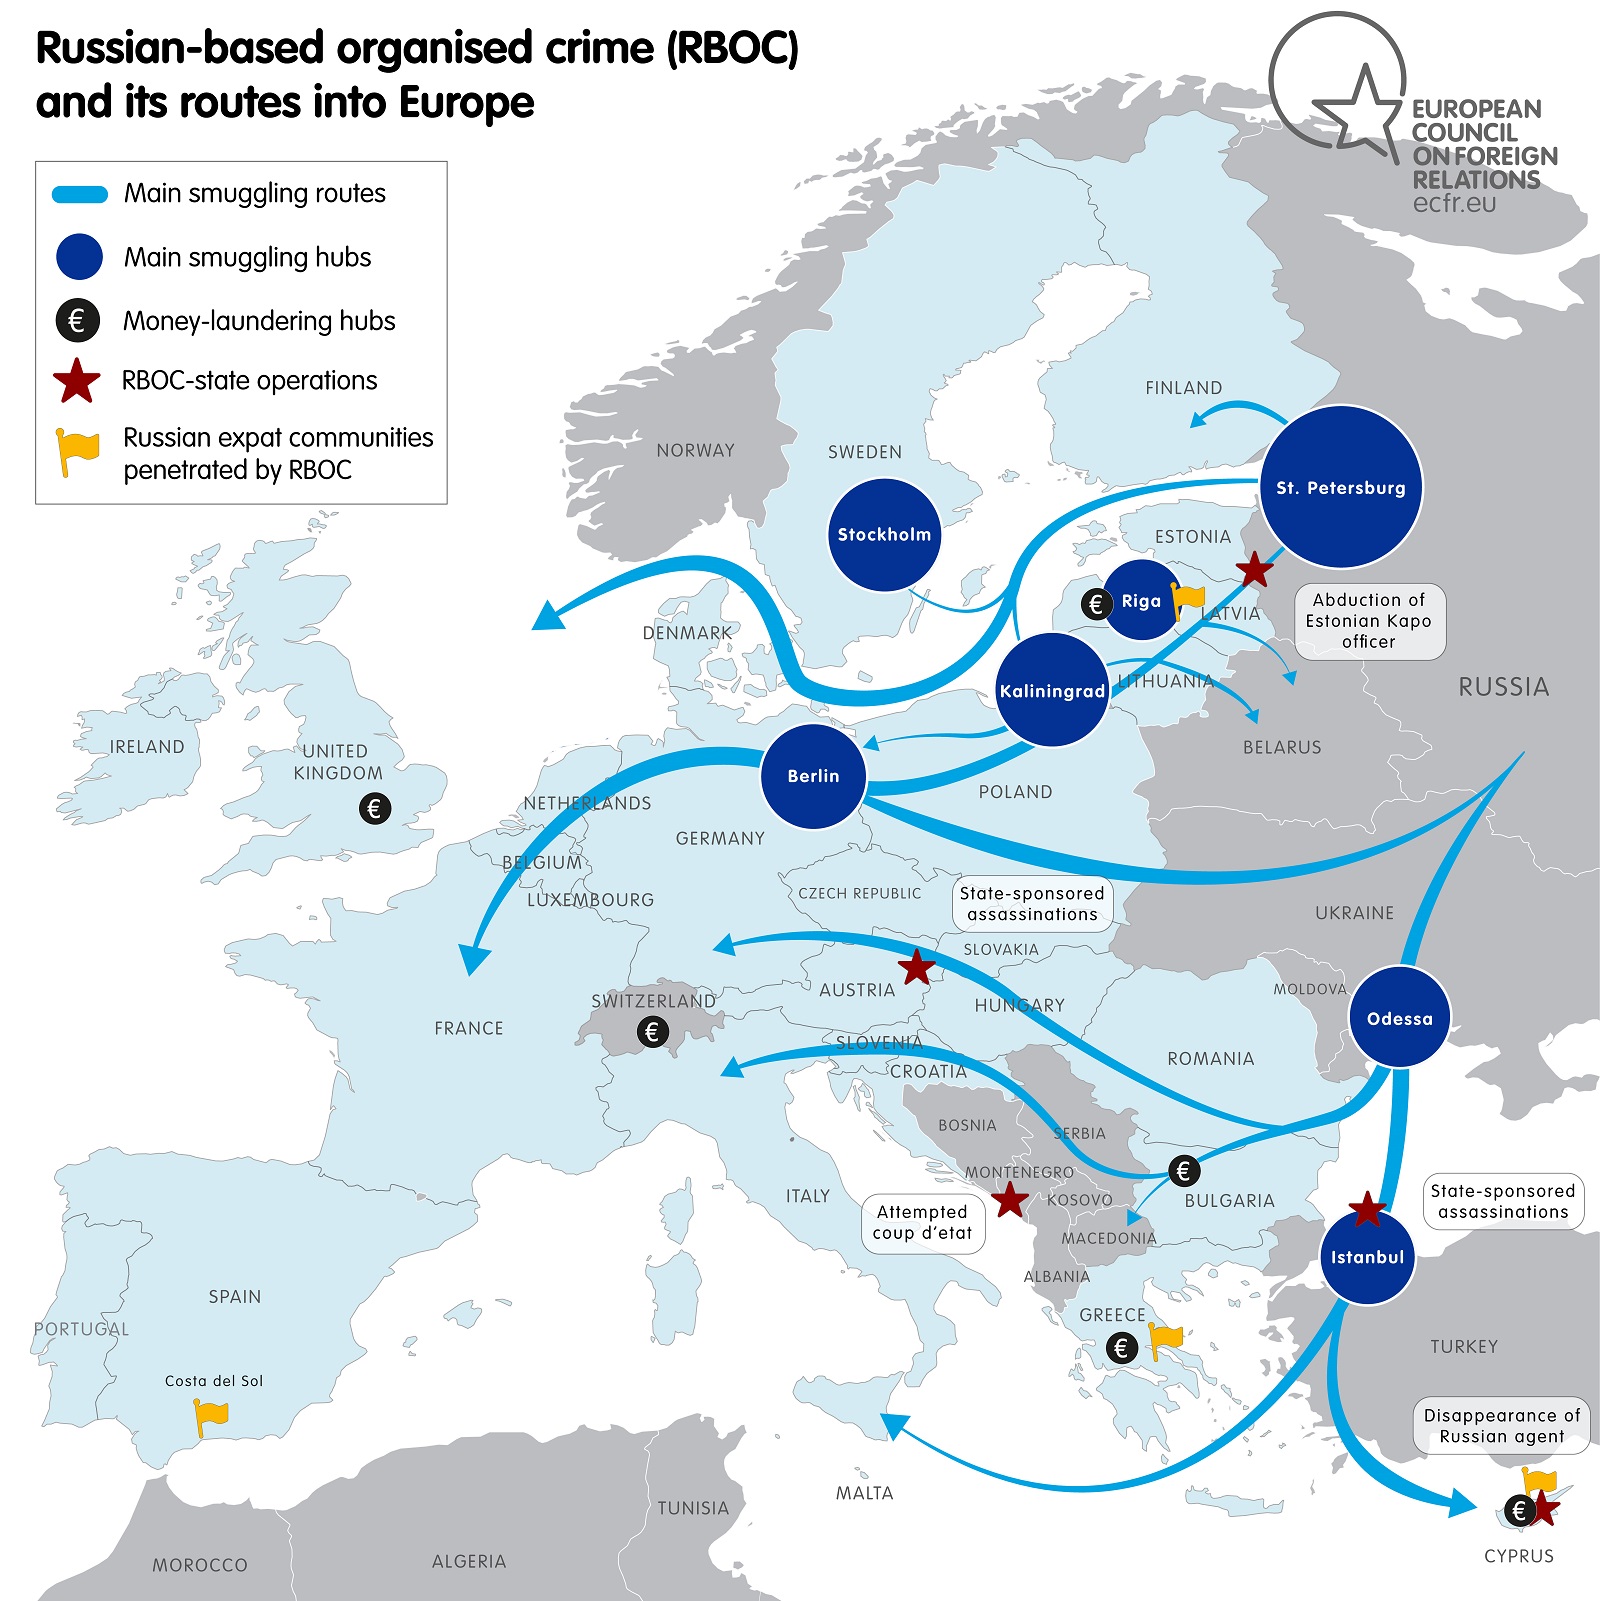 Map of Russian-based organised crime (RBOC) and its routes into Europe